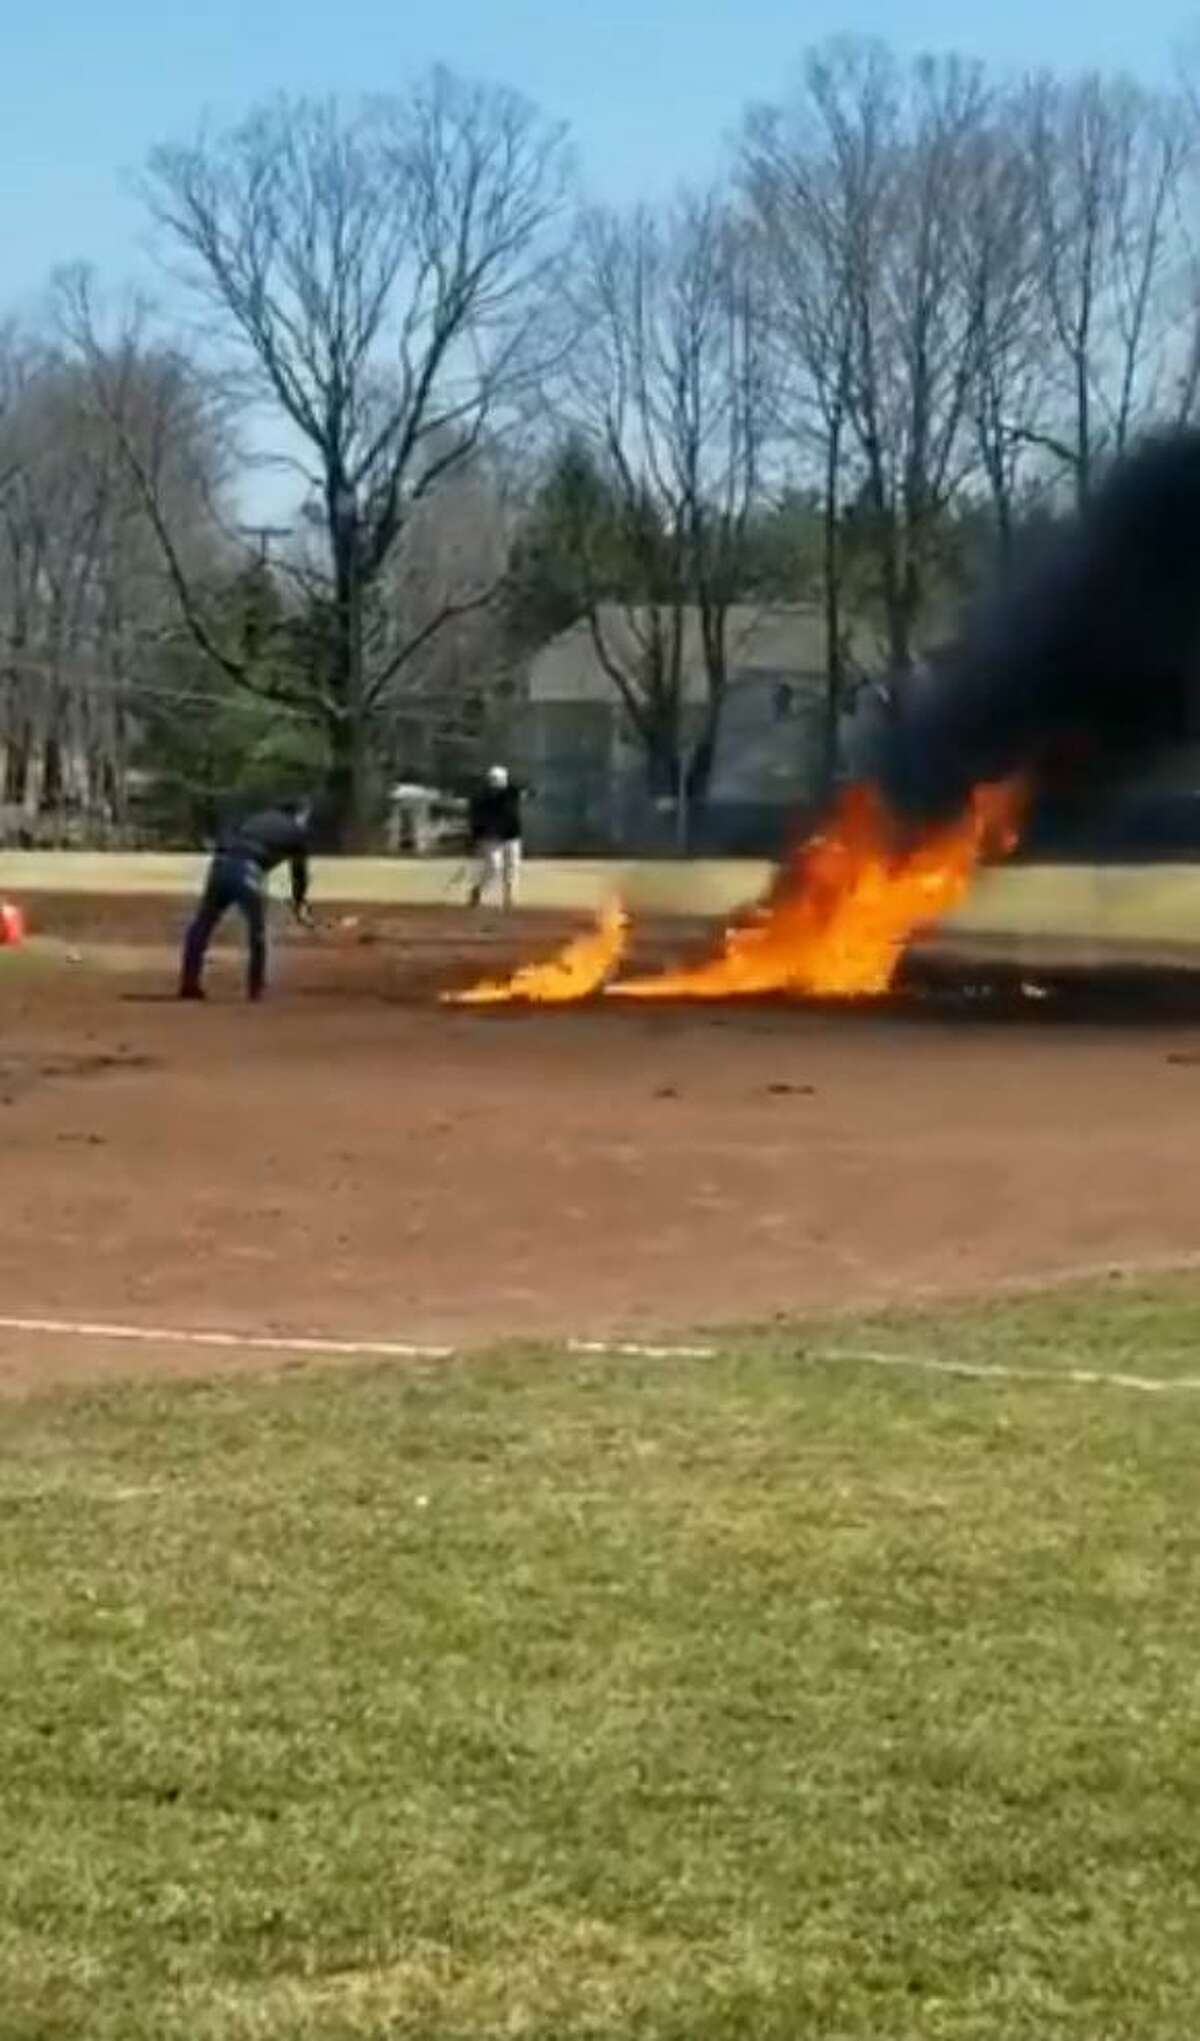 On April 6, 25 gallons of gasoline were poured onto the infield of Ciuccoli Field, in Ridgefield, and lit on fire in an attempt to make the field playable for the Ridgefield High School baseball team.